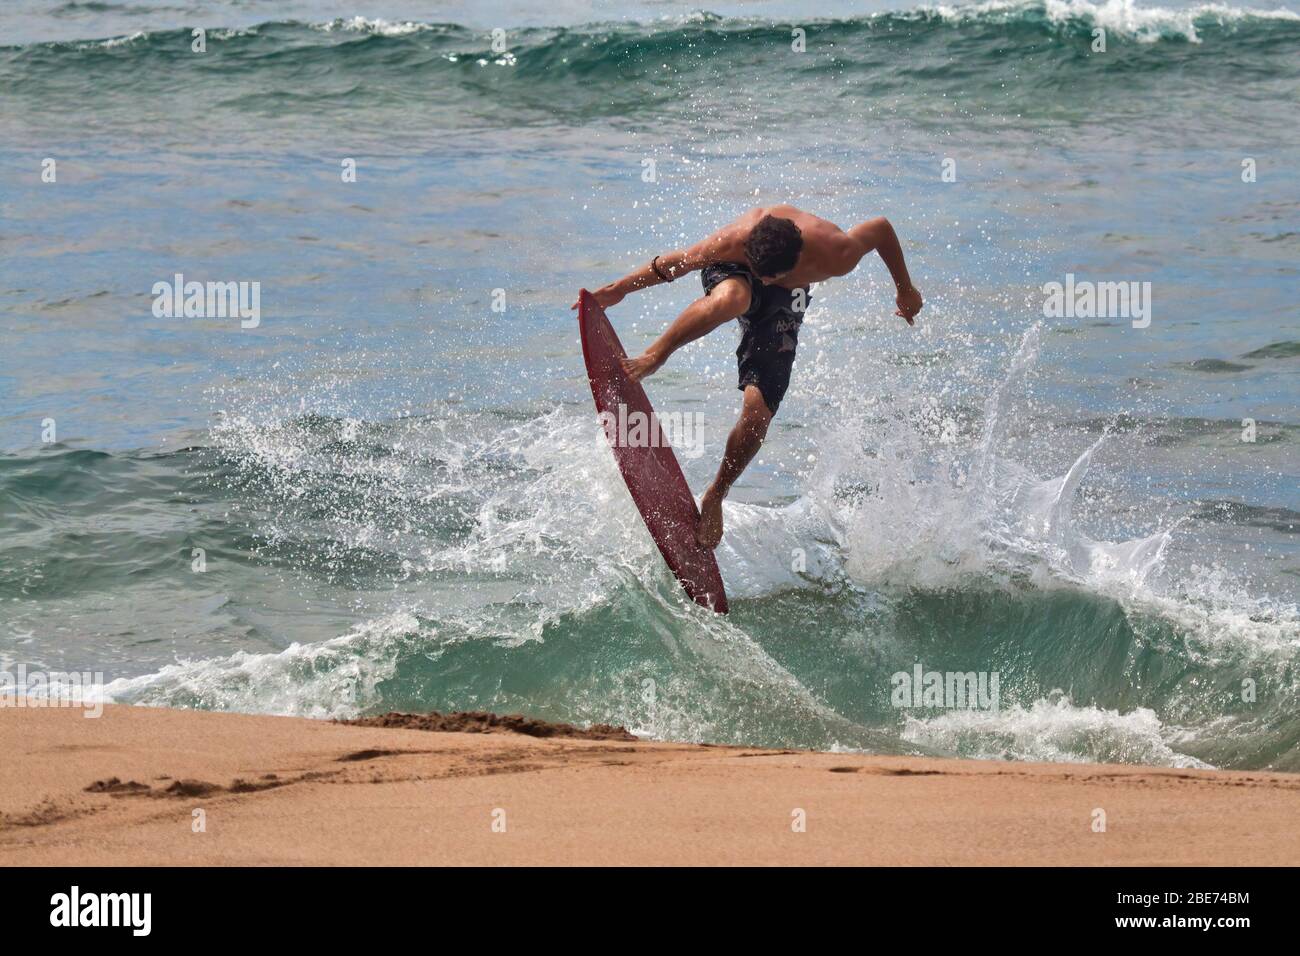 High energy shot of a young male on a skim board at the beach. Stock Photo